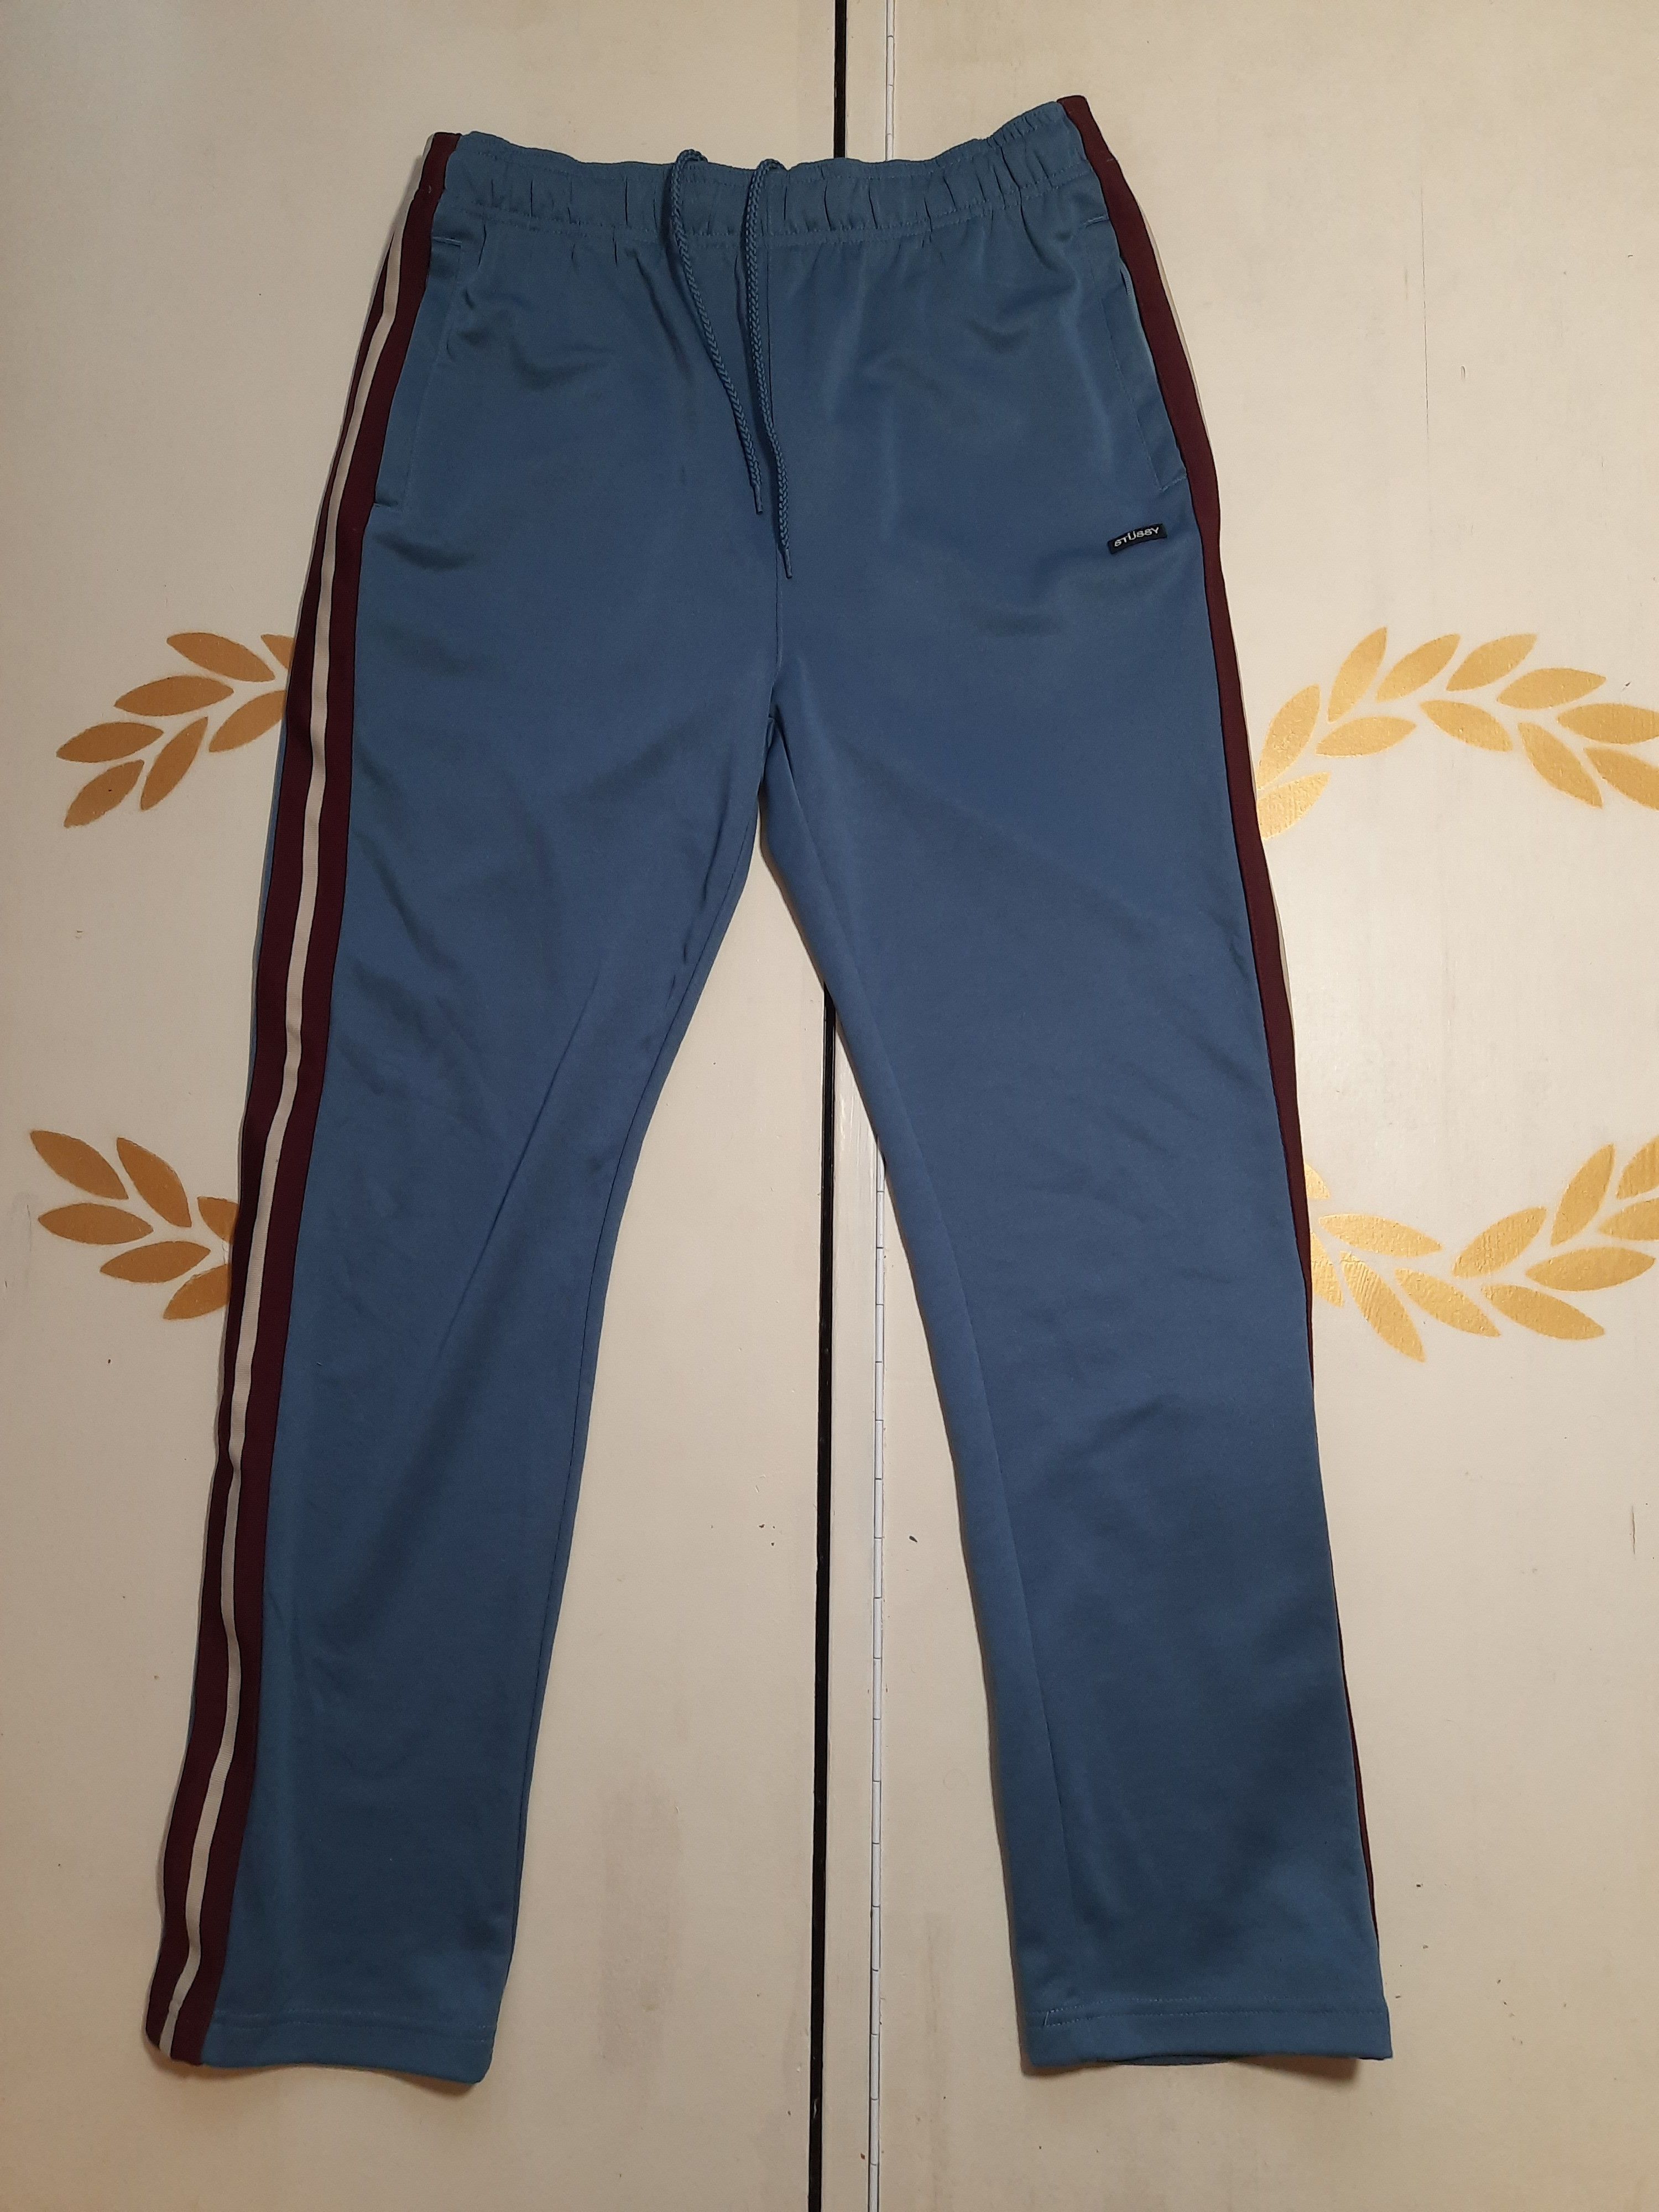 Stussy Stussy Poly Track Pants | Grailed